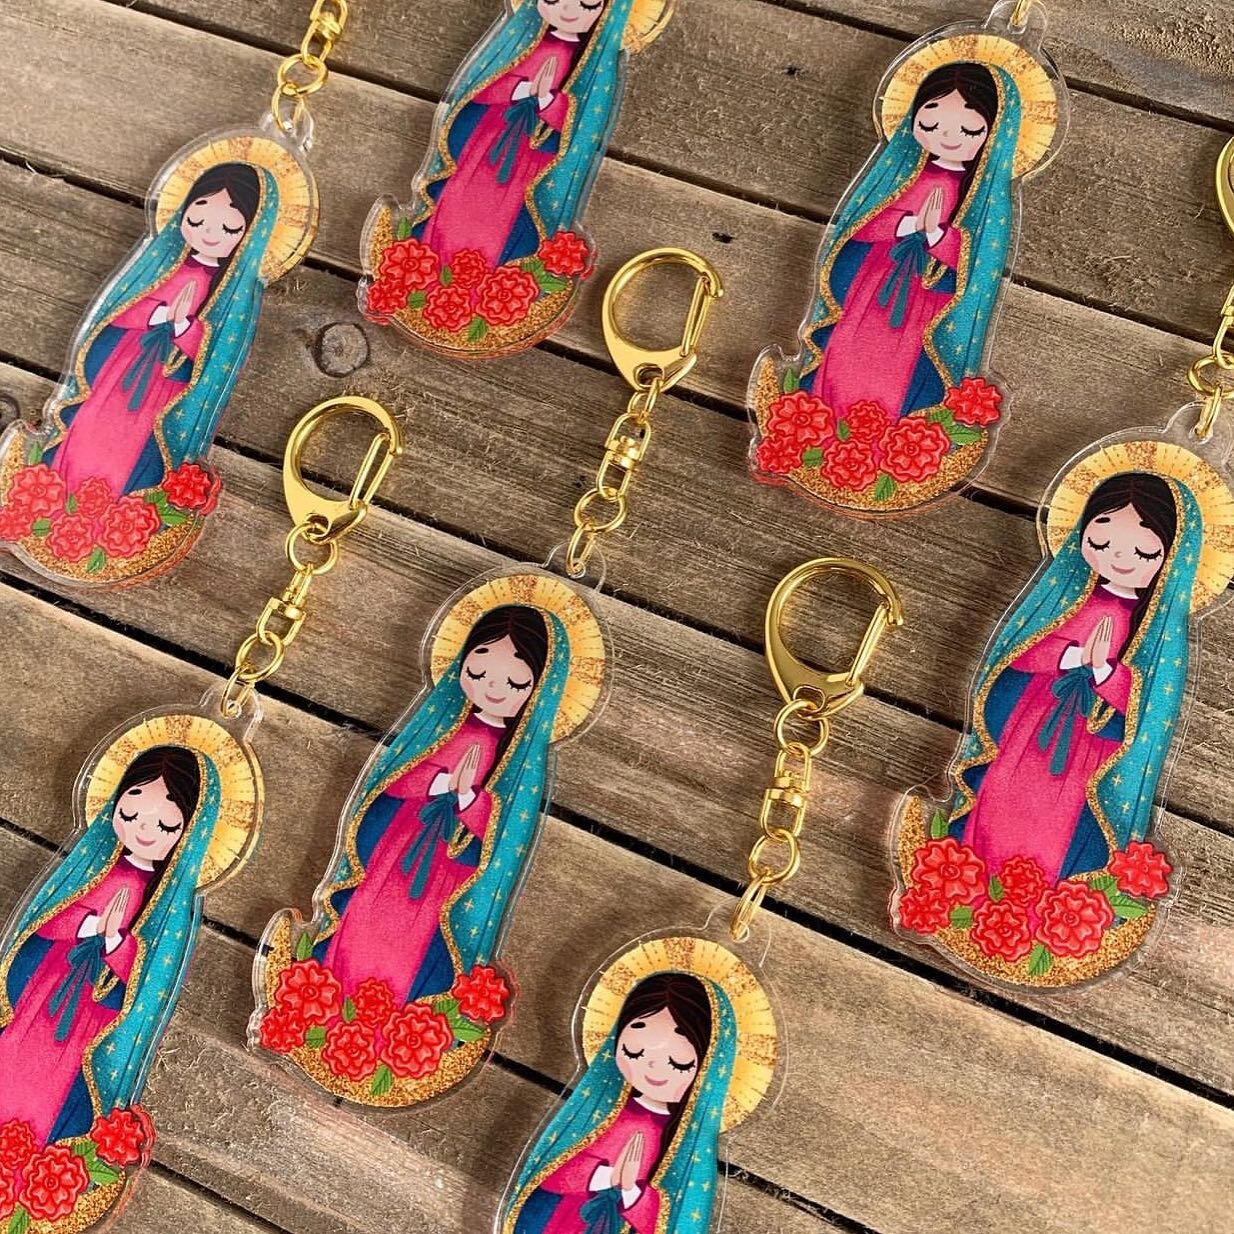 Virgencita keychains are back in tomorrow&rsquo;s shop update. ✨🌹✨ 11/5 at 1 pm PST. #thehappyskullstudio